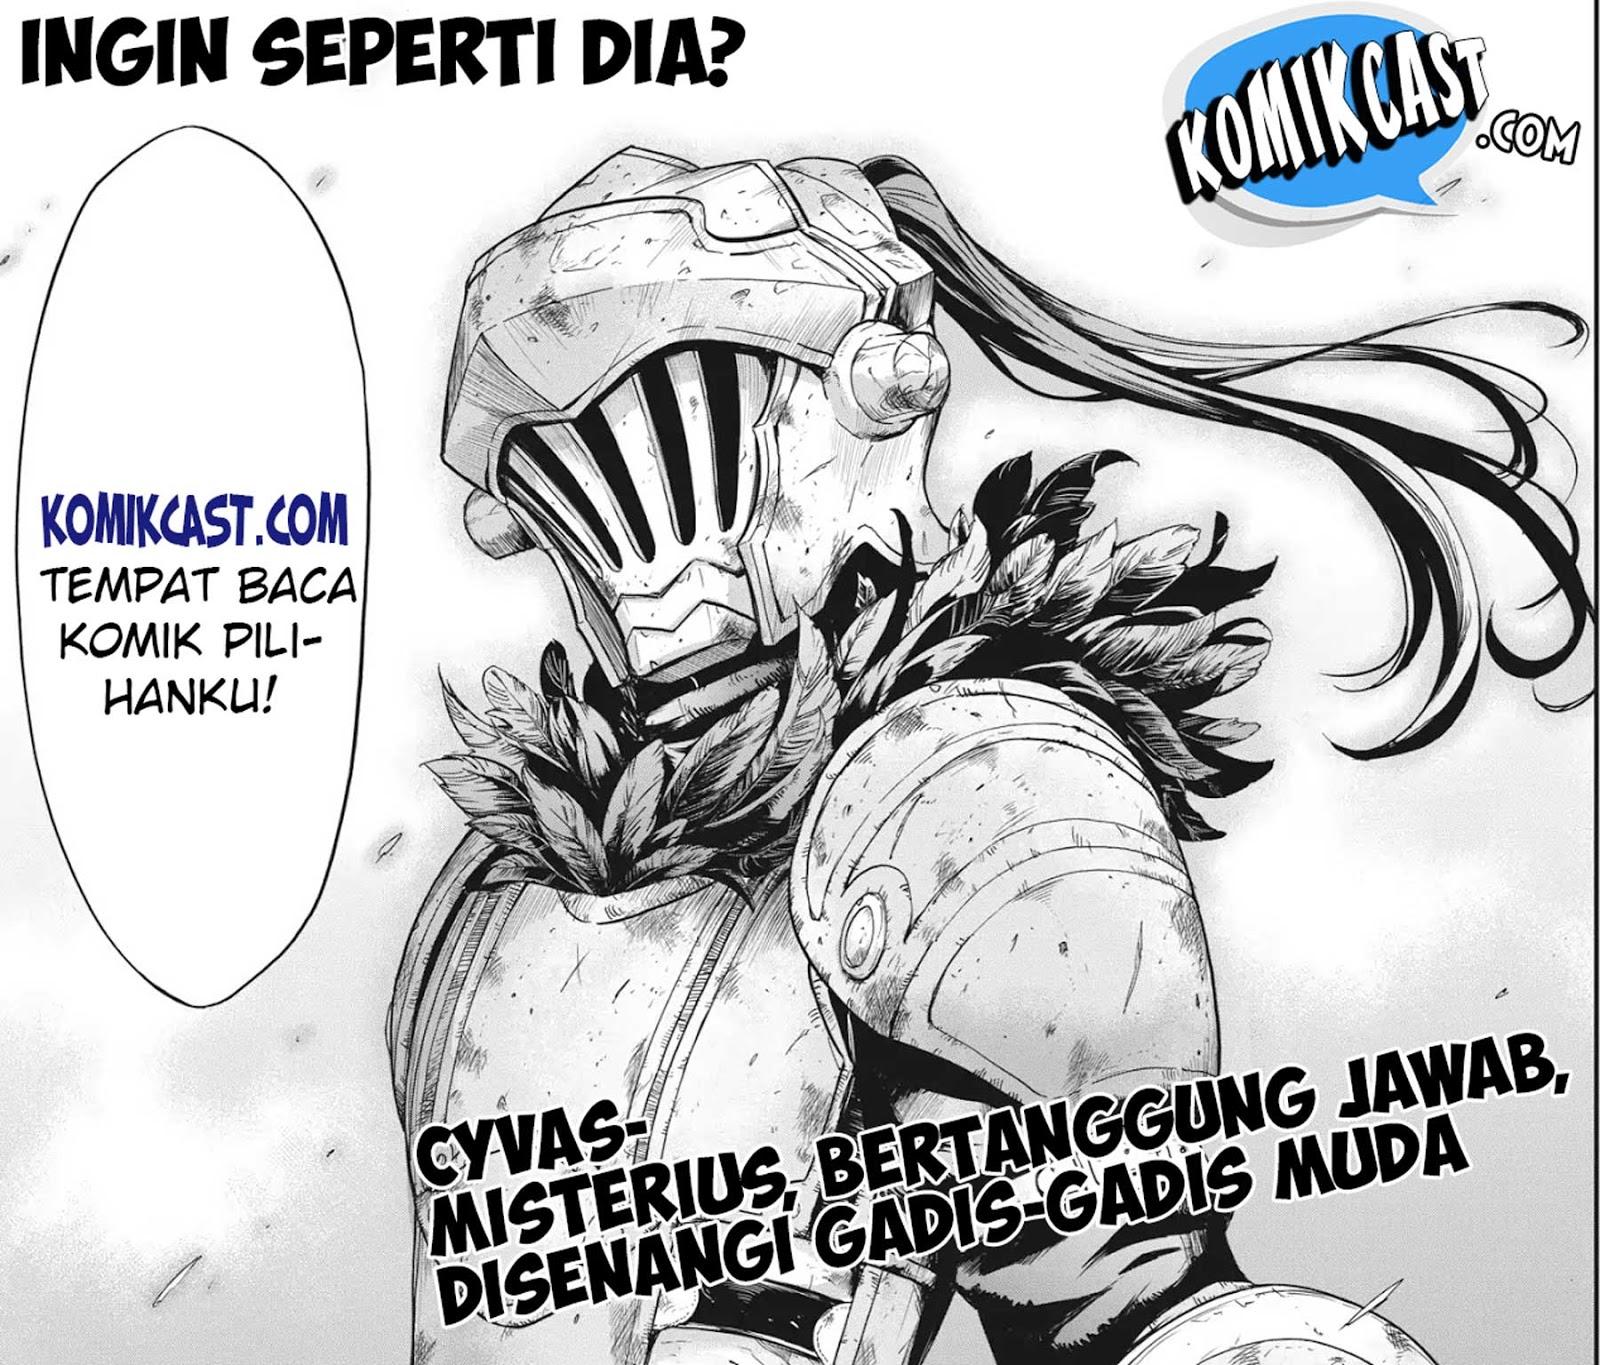 Goblin Slayer: Side Story Year One Chapter 20